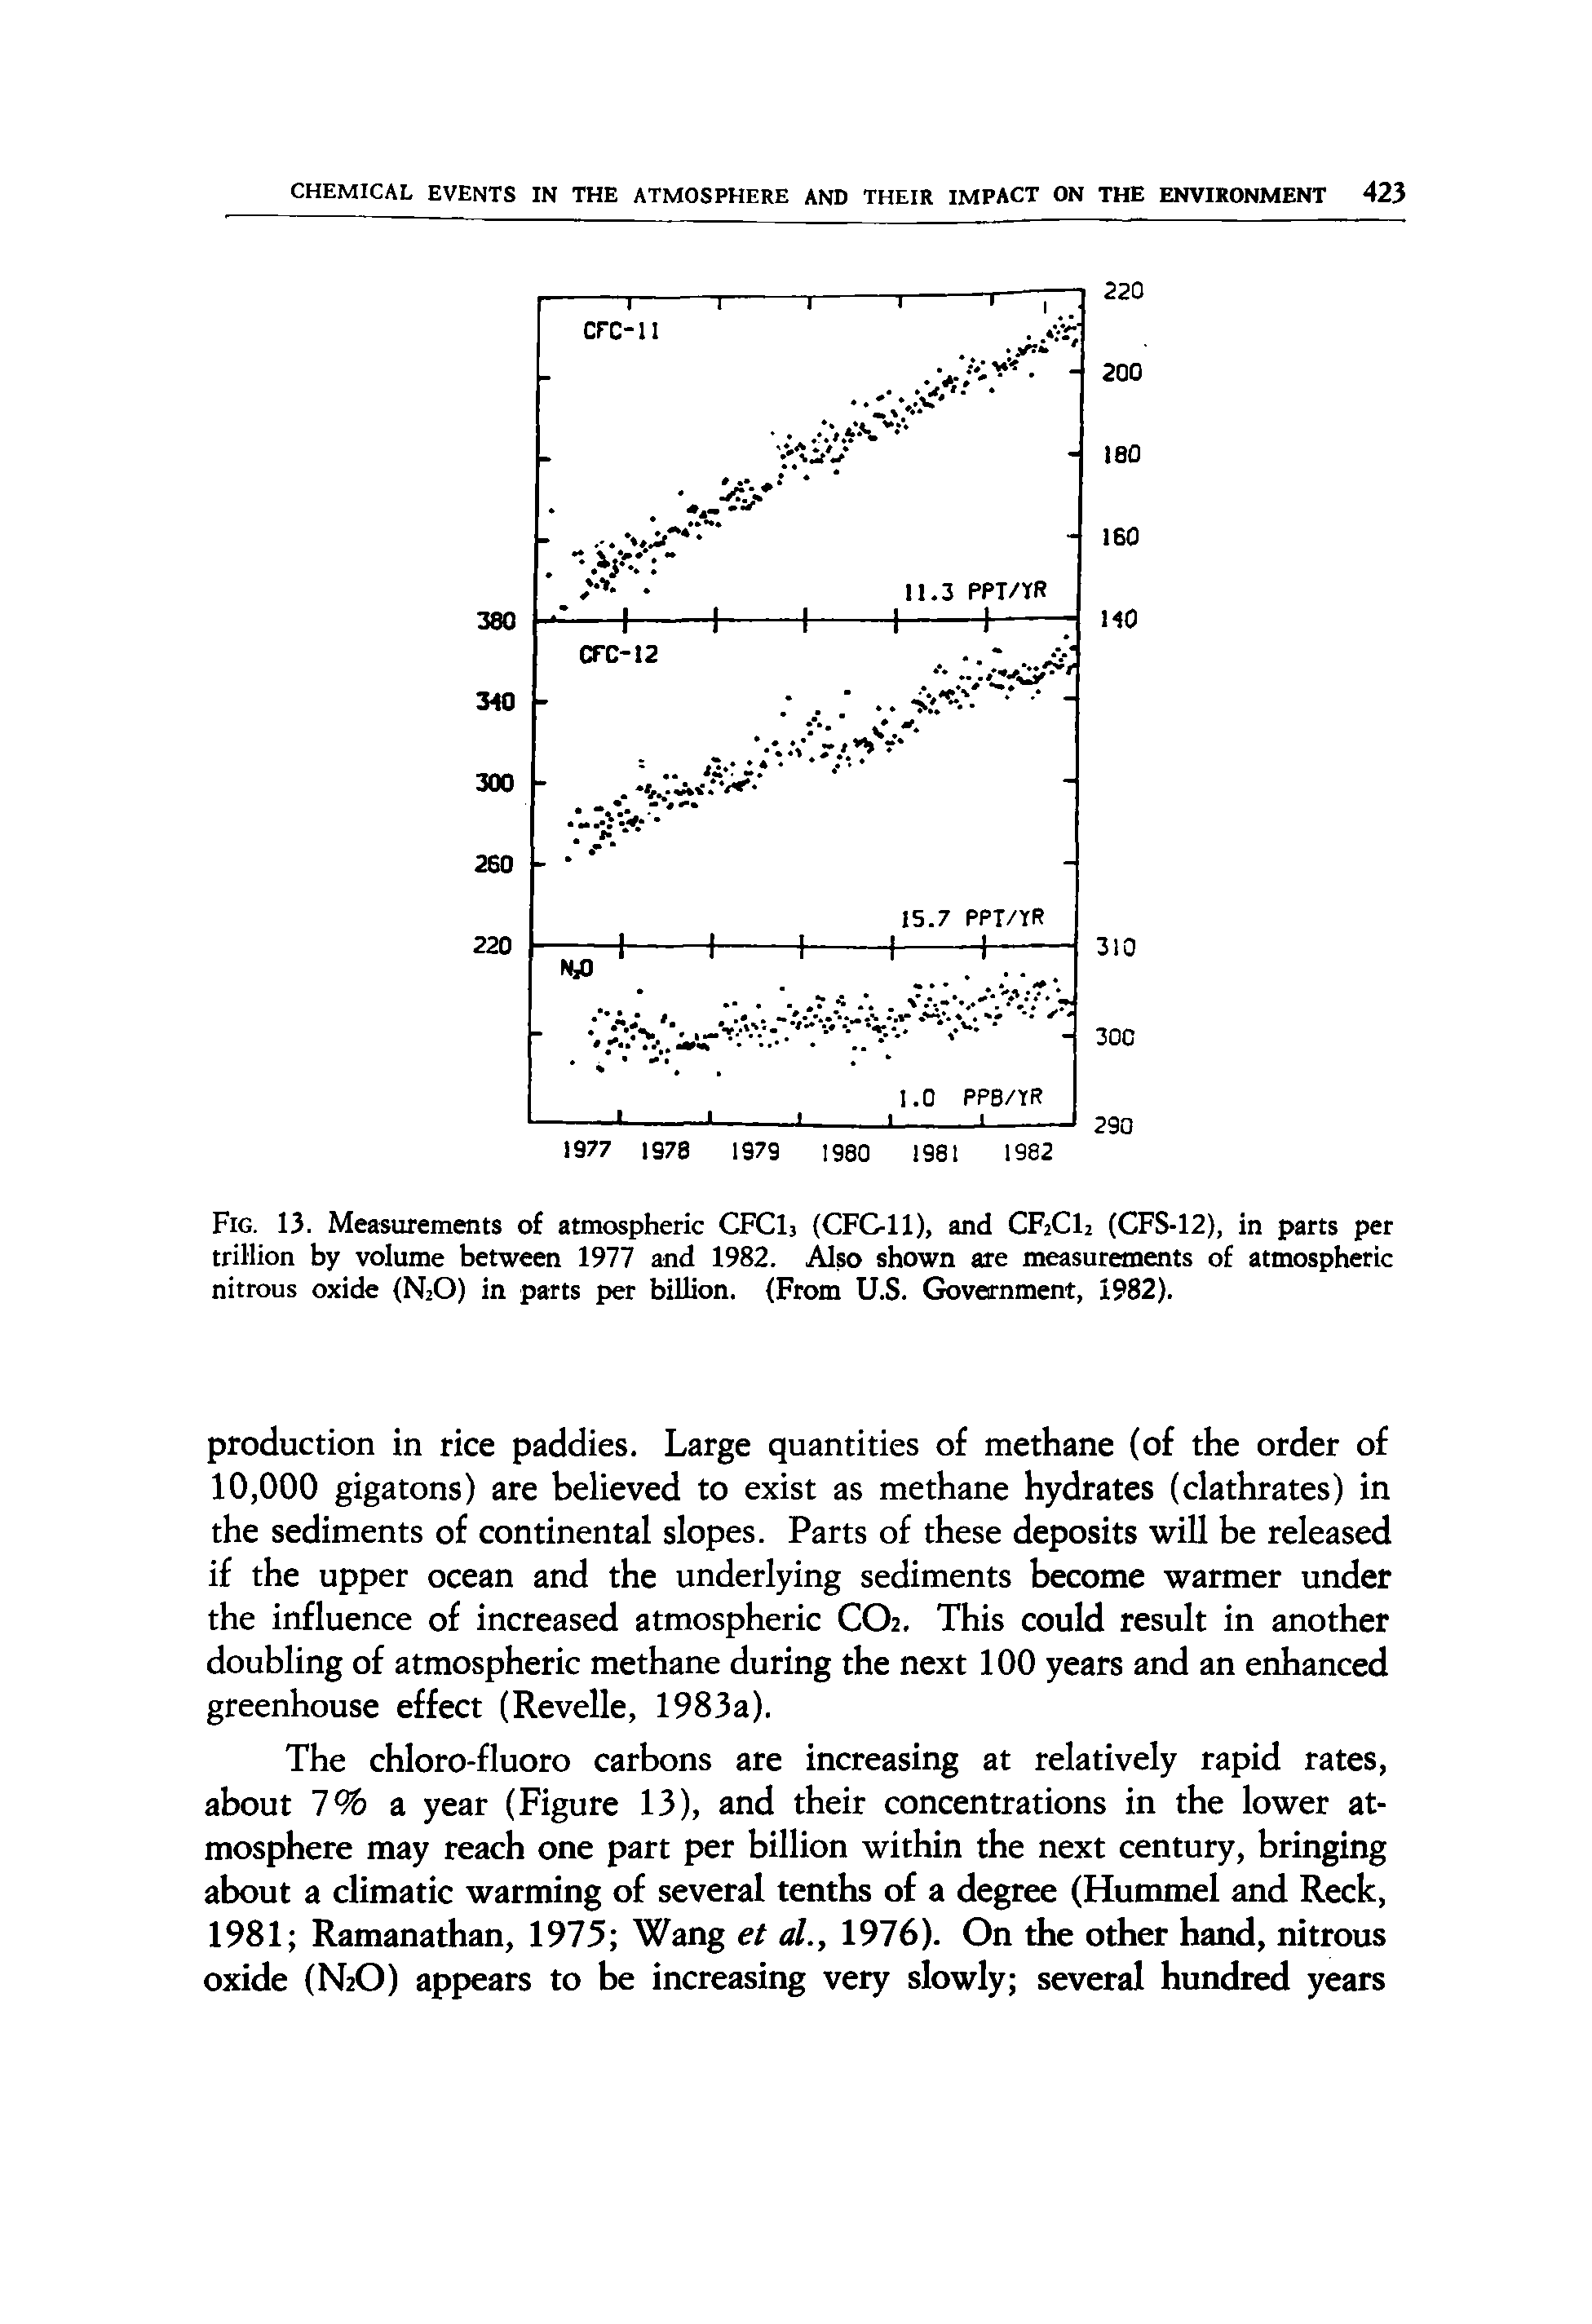 Fig. 13. Measurements of atmospheric CFCI3 (CF ll), and CF2CI2 (CFS-12), in parts per trillion by volume between 1977 and 1982. Also shown are measurements of atmospheric nitrous oxide (N2O) in parts per billion. (From U.S. Government, 1982).